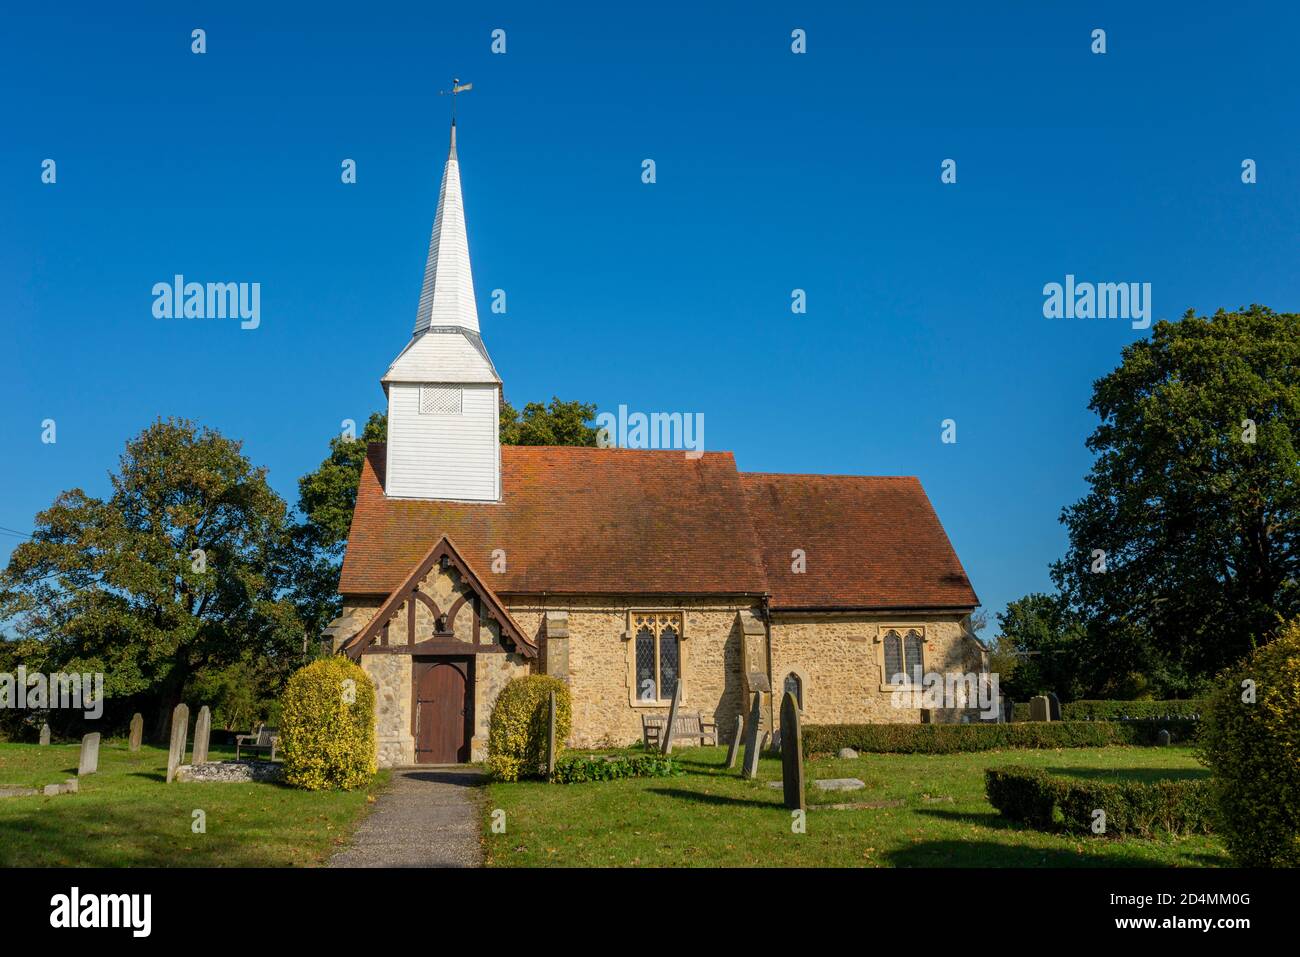 St Mary the Virgin church in Hawkwell, Rochford, near Southend, Essex, UK. Chelmsford diocese. Stone rubble construction. Bright Autumn day Stock Photo